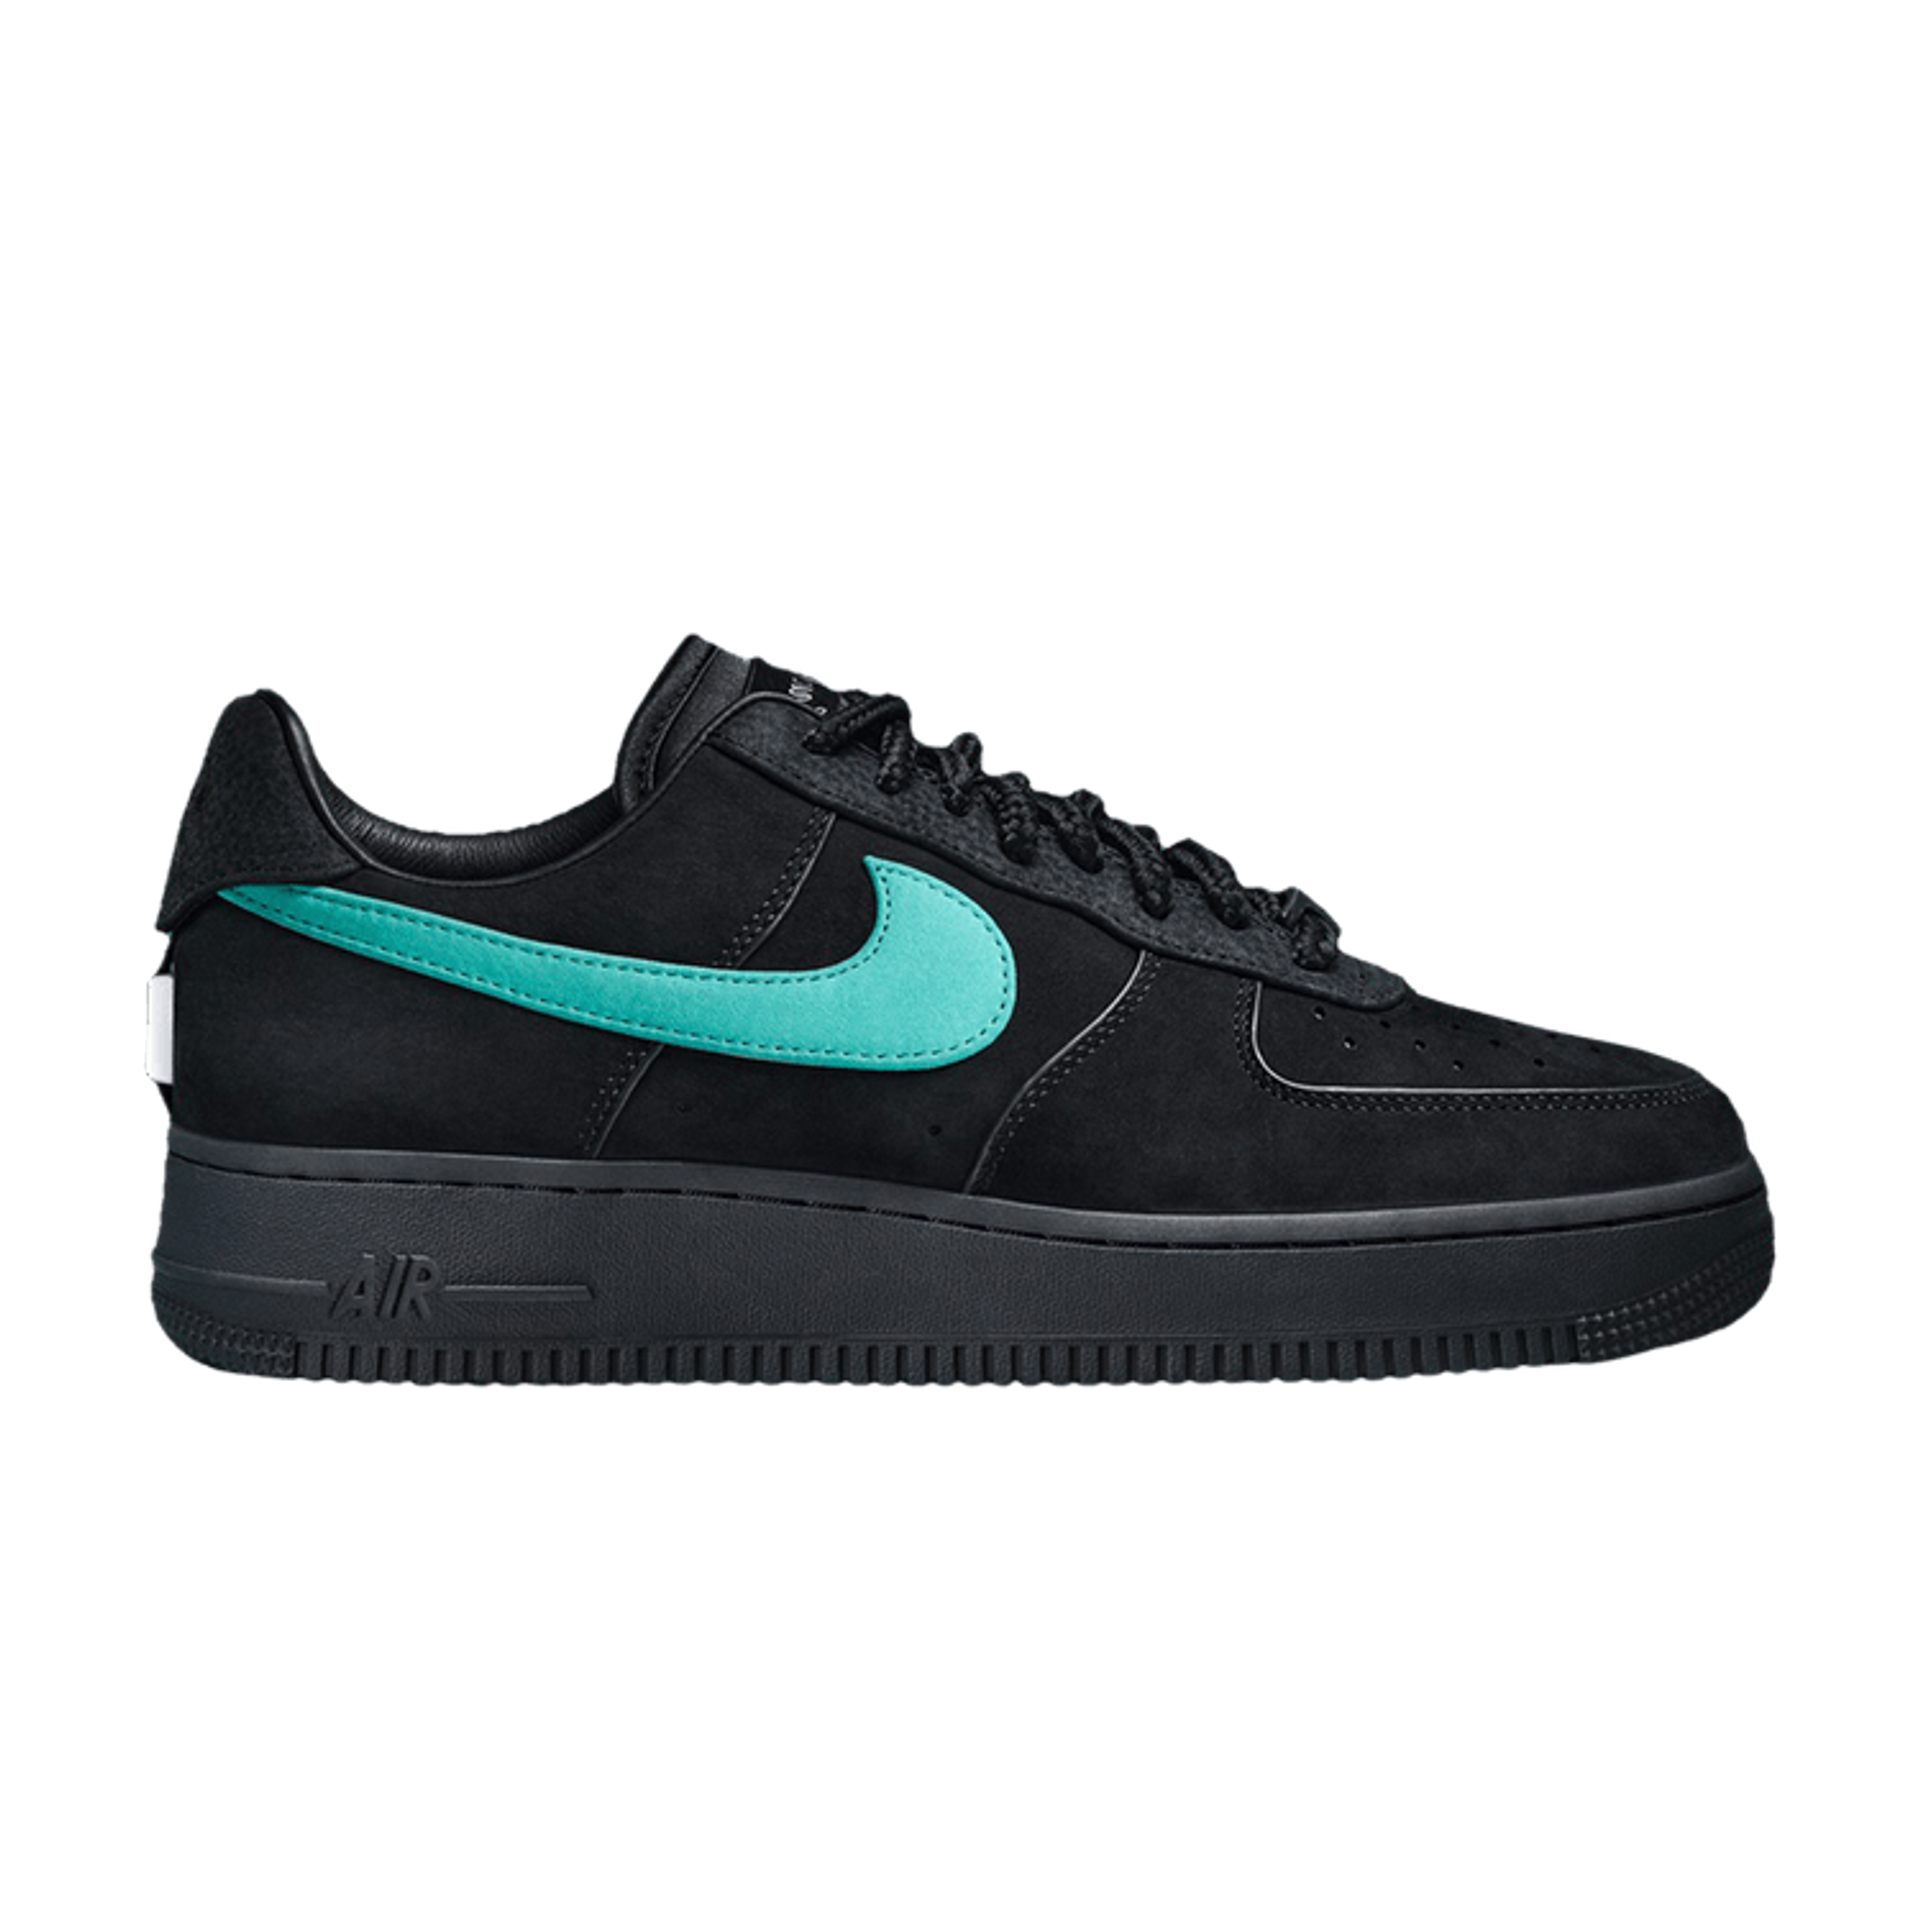 Tiffany & Co. x Nike Air Force 1 Low '1837'